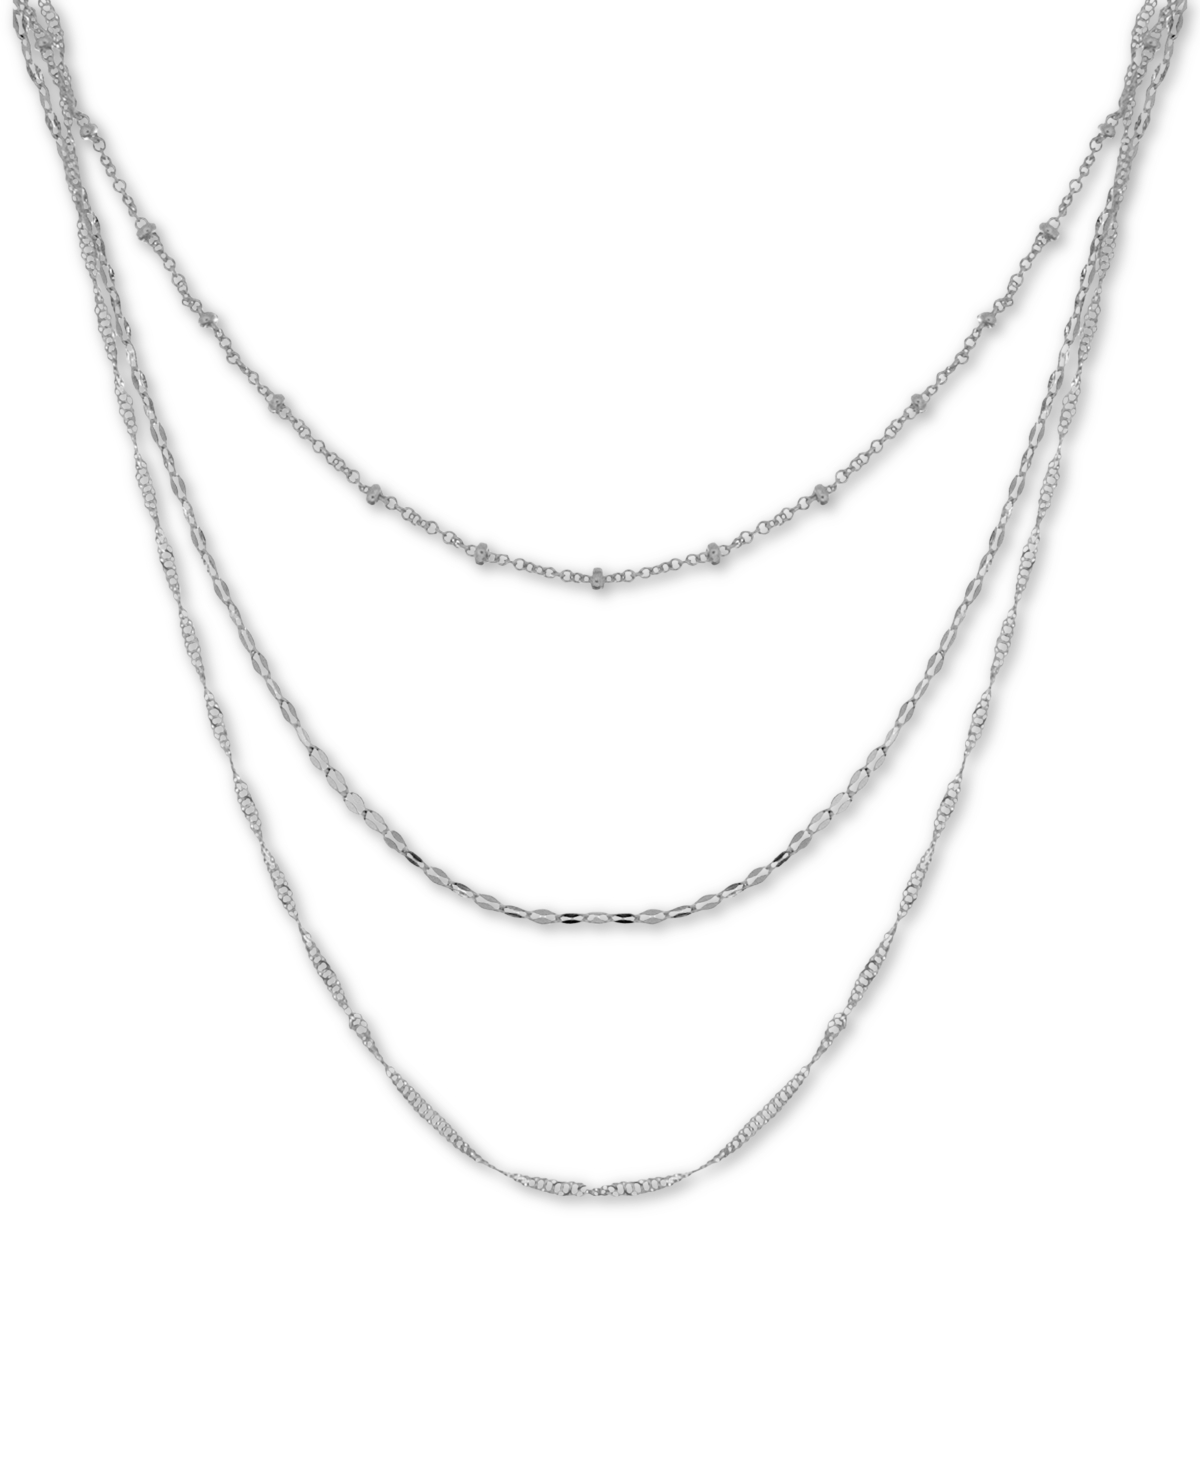 Silver Plated Multi-Chain 18" Layered Statement Necklace - Silver